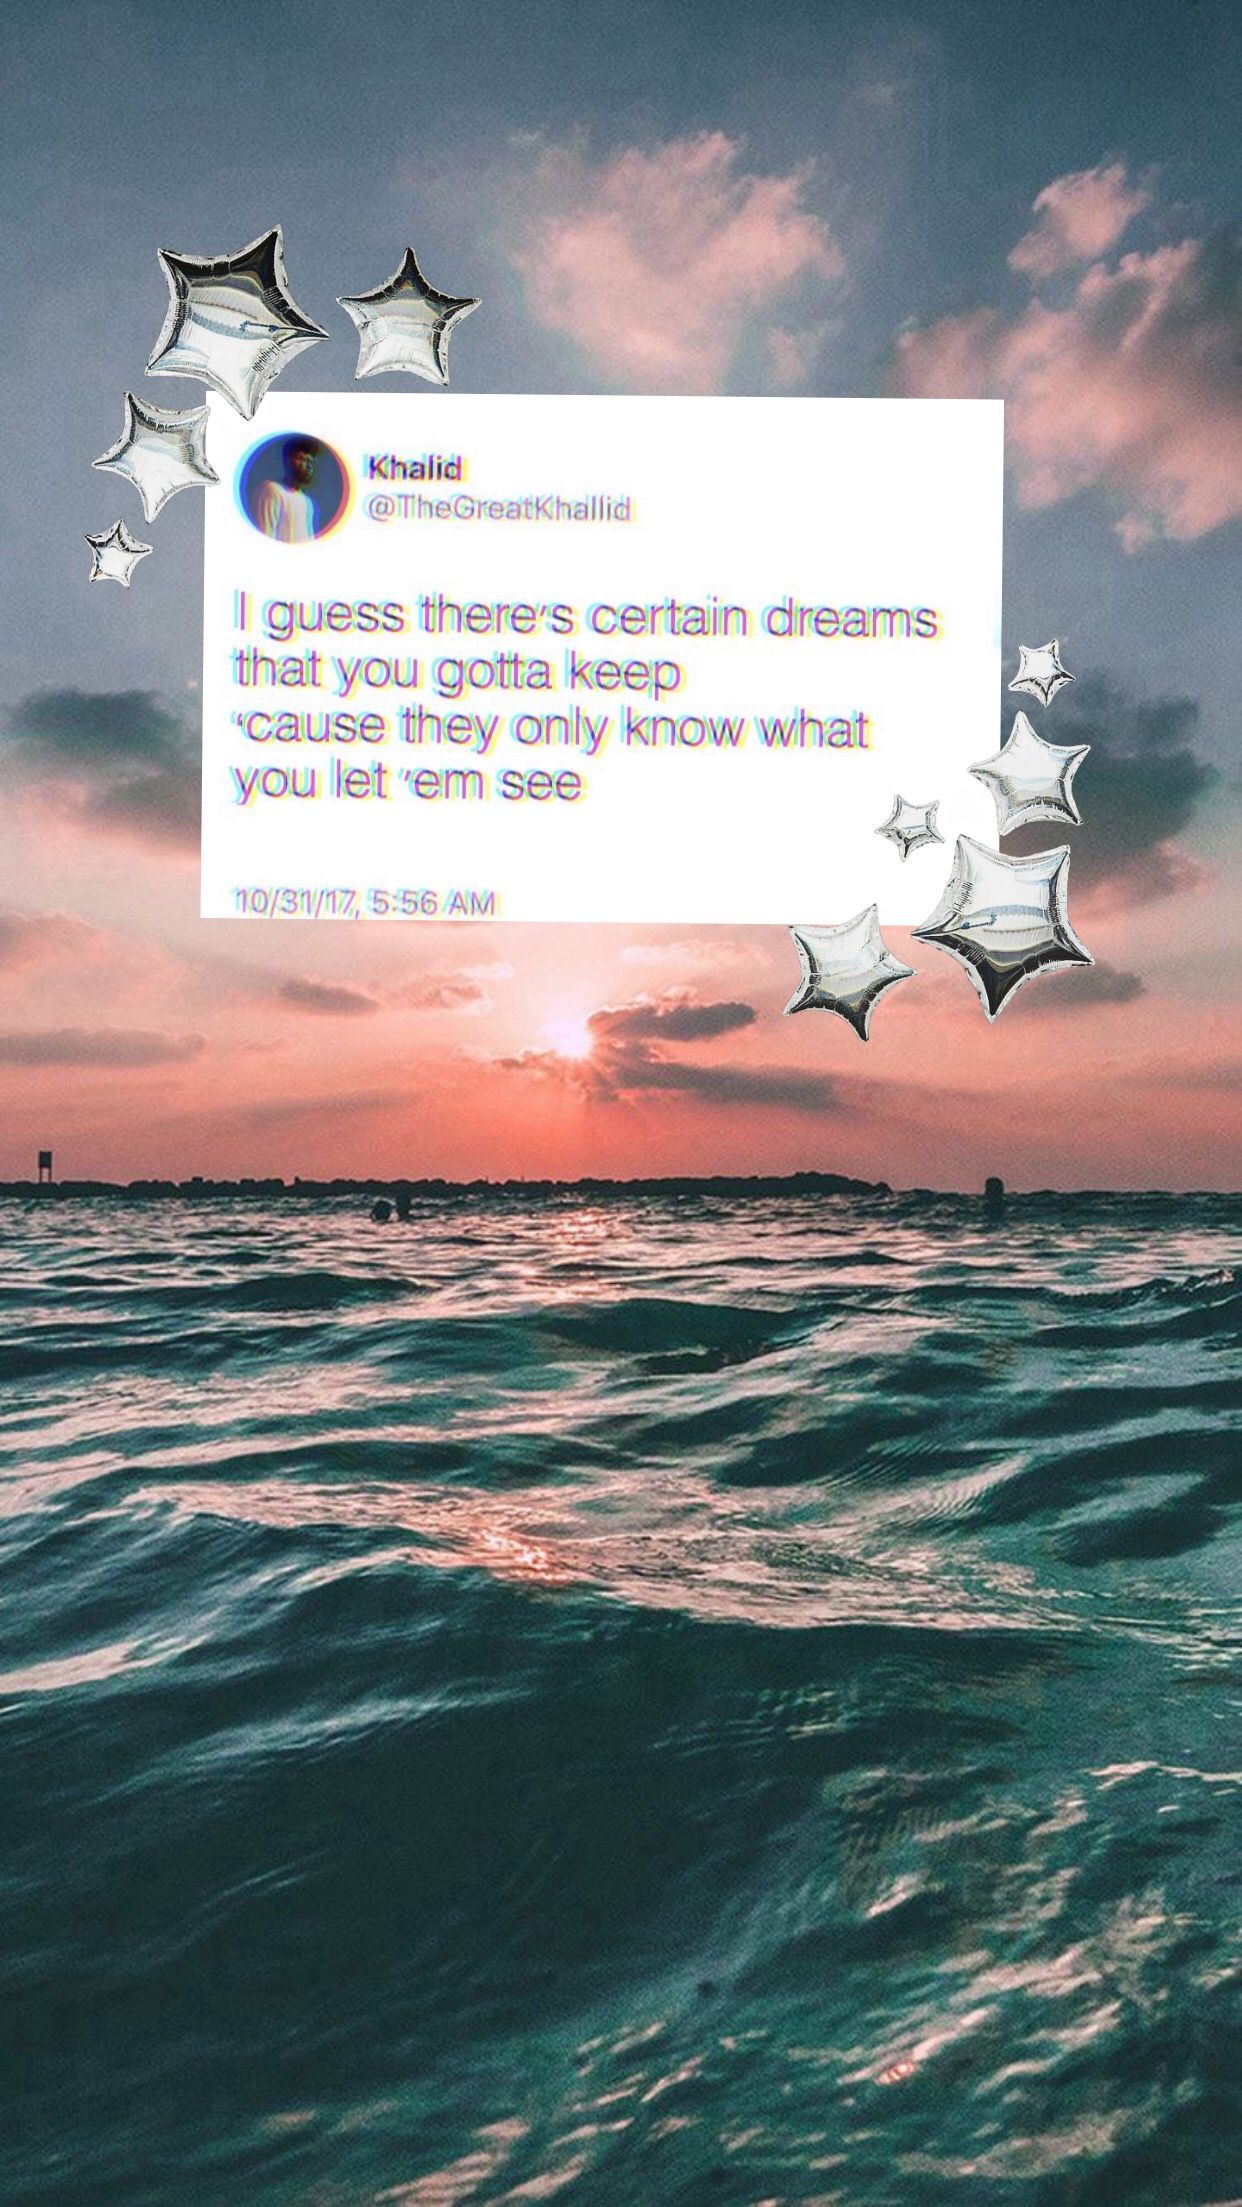 Here's a wallpaper:) Khalid inspires me so much. #wallpaper #tweets #sunset. Khalid quotes, Celebration quotes, Instagram captions